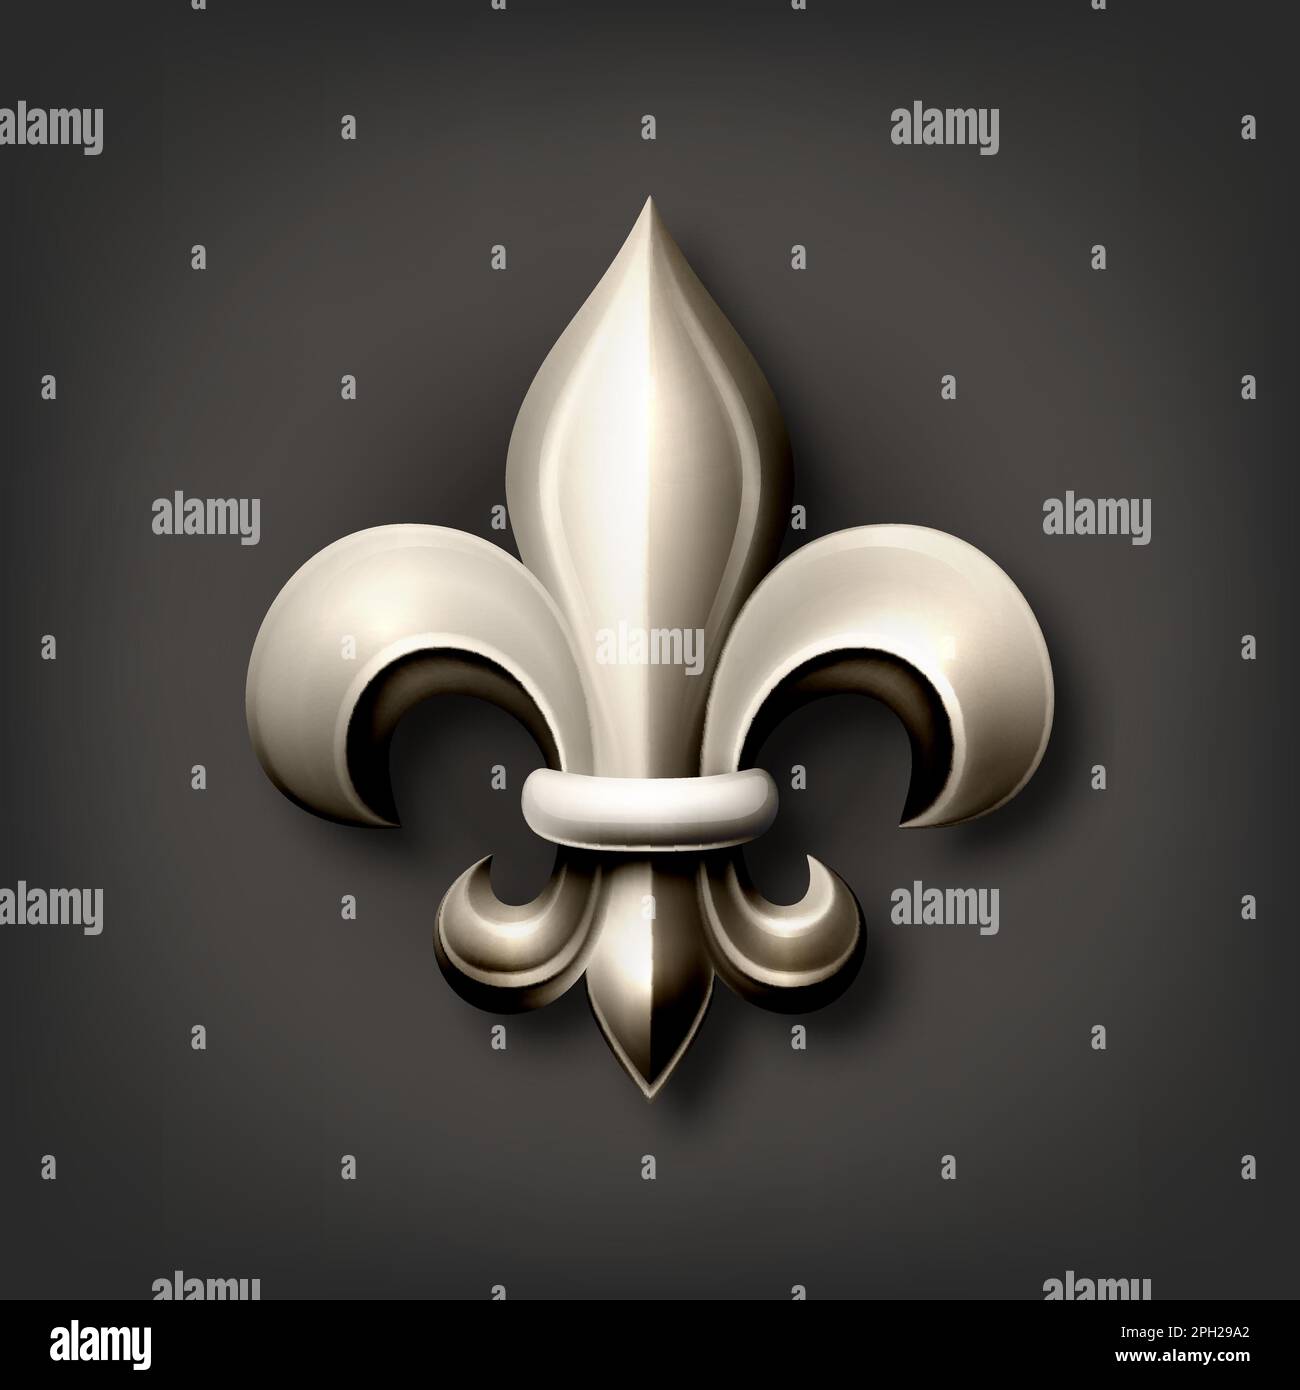 https://c8.alamy.com/comp/2PH29A2/vector-3d-realistic-metal-bronze-silver-fleur-de-lis-icon-closeup-isolated-on-black-background-heraldic-lily-collection-front-view-vector-2PH29A2.jpg